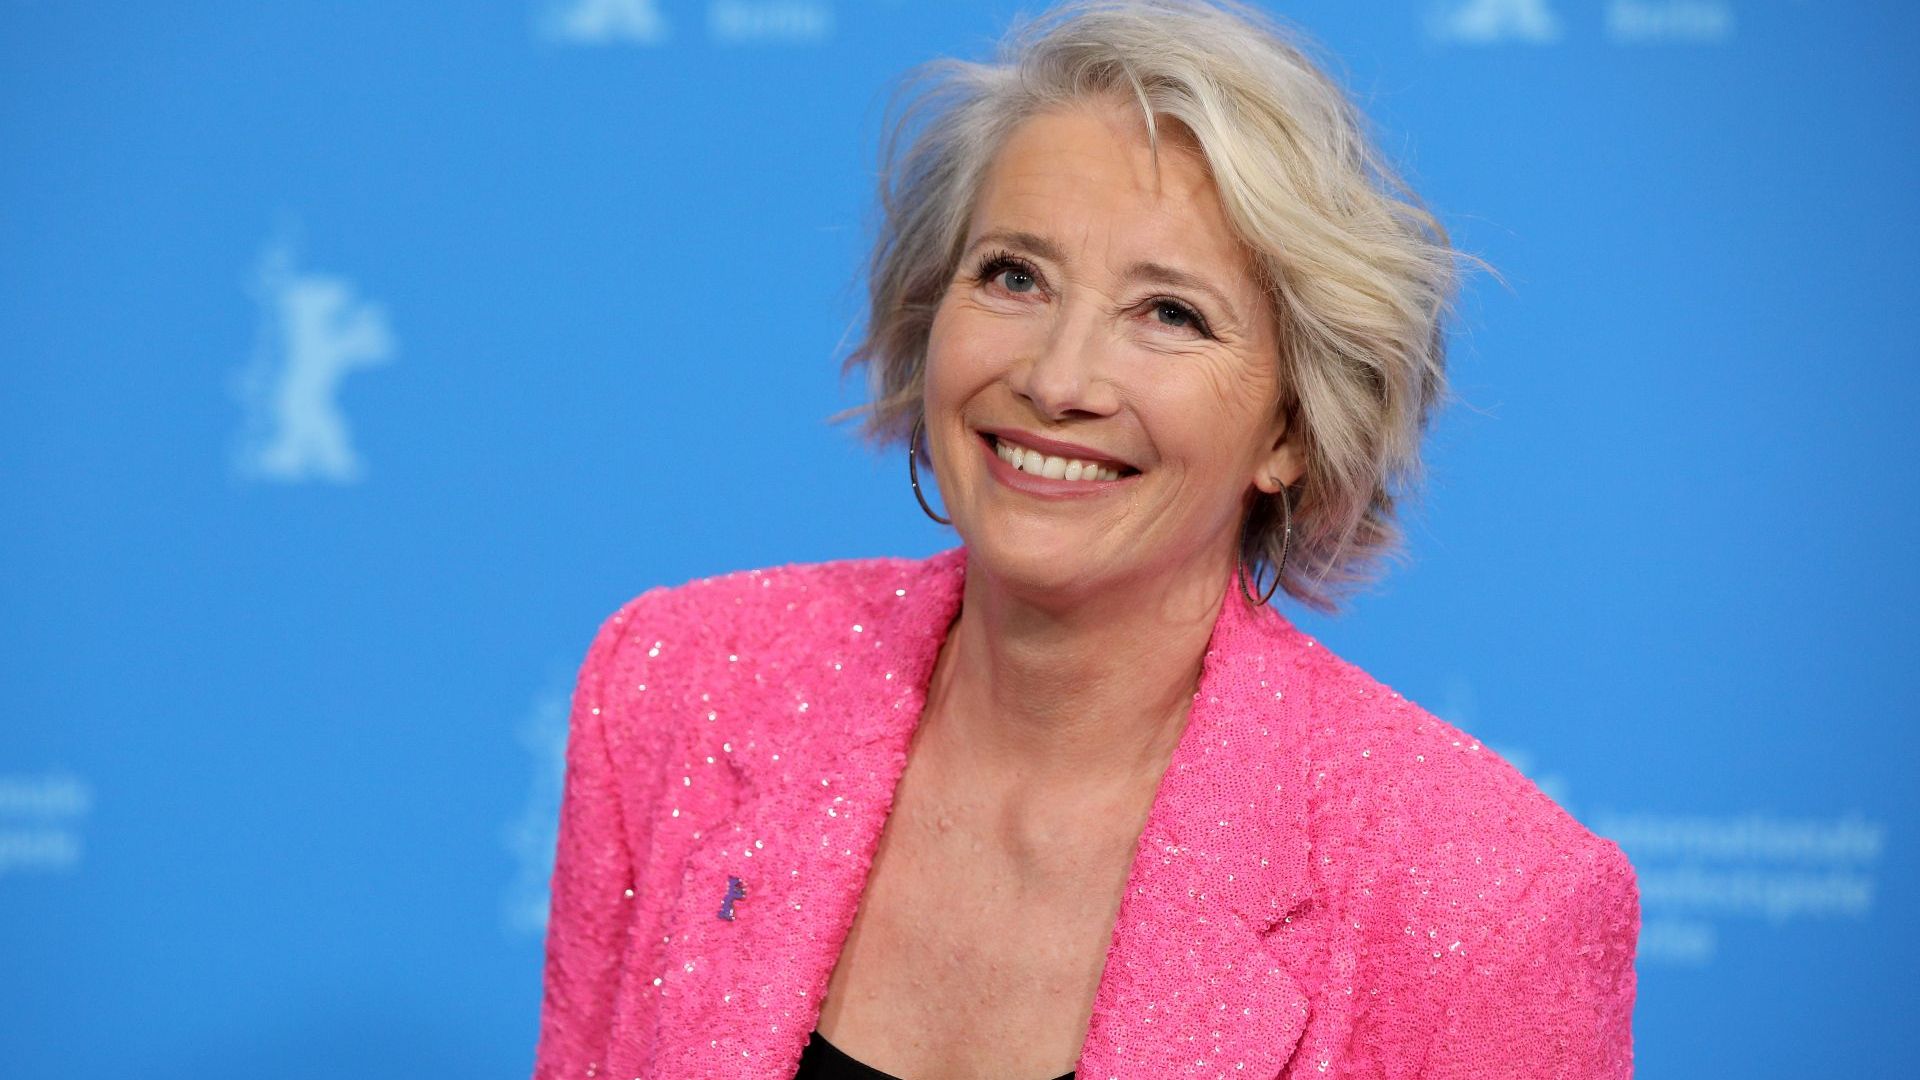 Emma Thompson on how being body shamed impacted her confidence